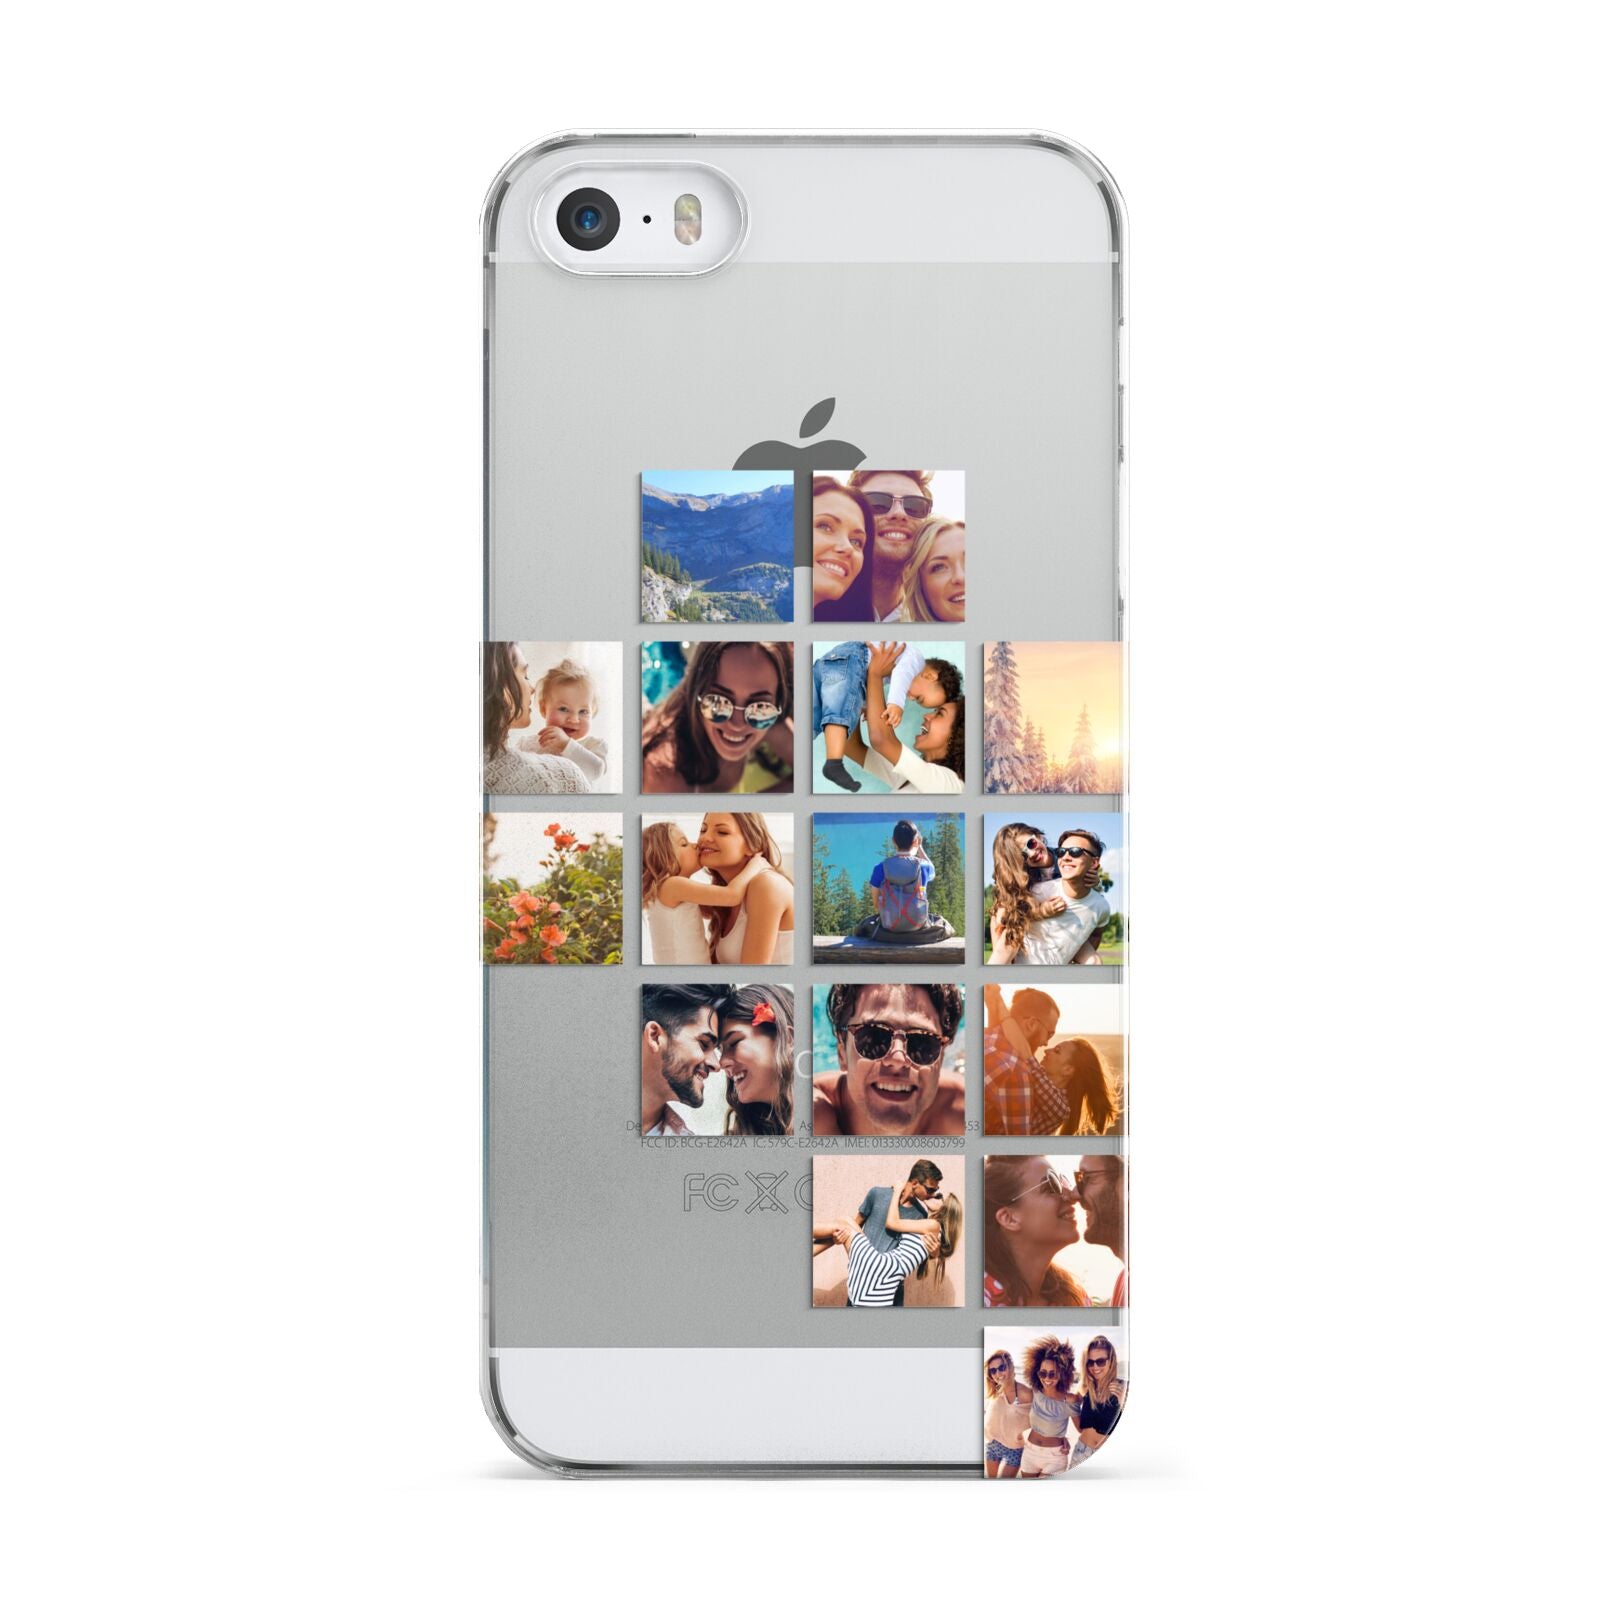 Right Diagonal Photo Montage Upload Apple iPhone 5 Case